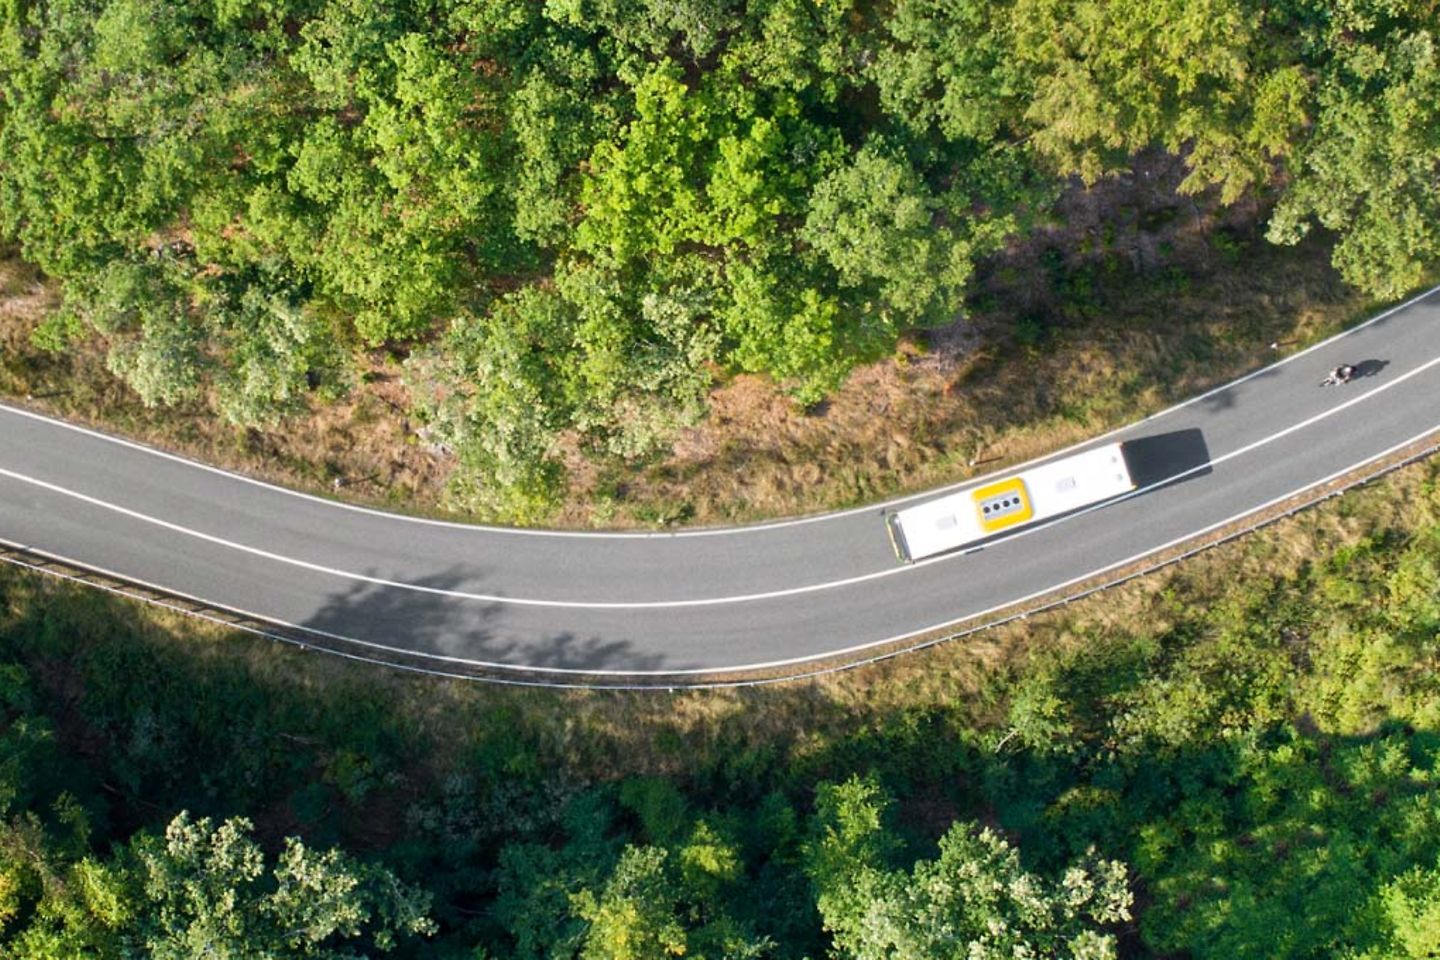 Aerial view of a road with a bus on it passing through the forest